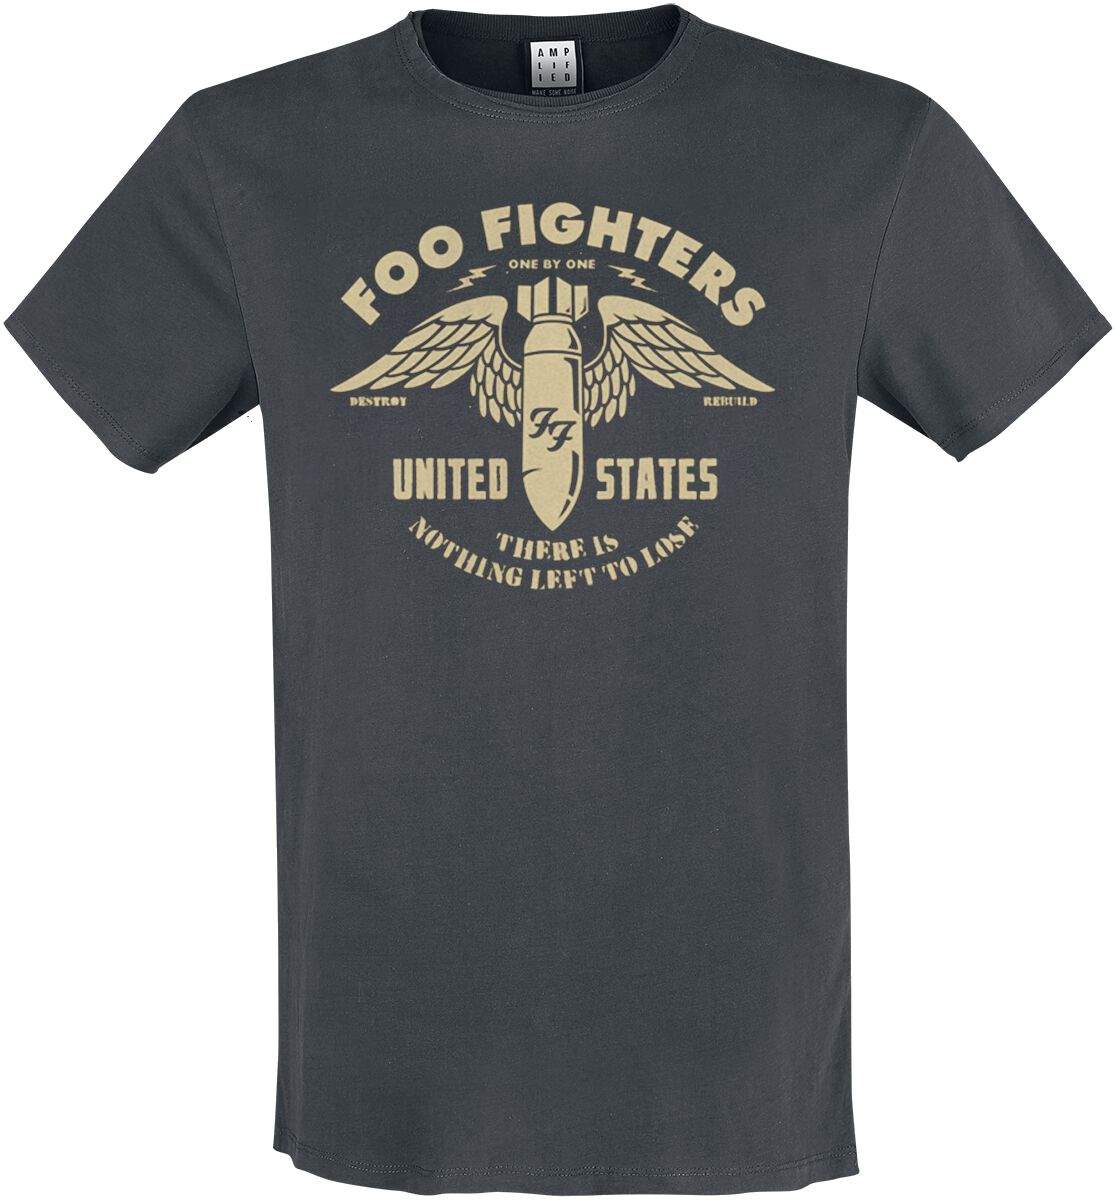 Foo Fighters Amplified Collection - One By One T-Shirt charcoal in S